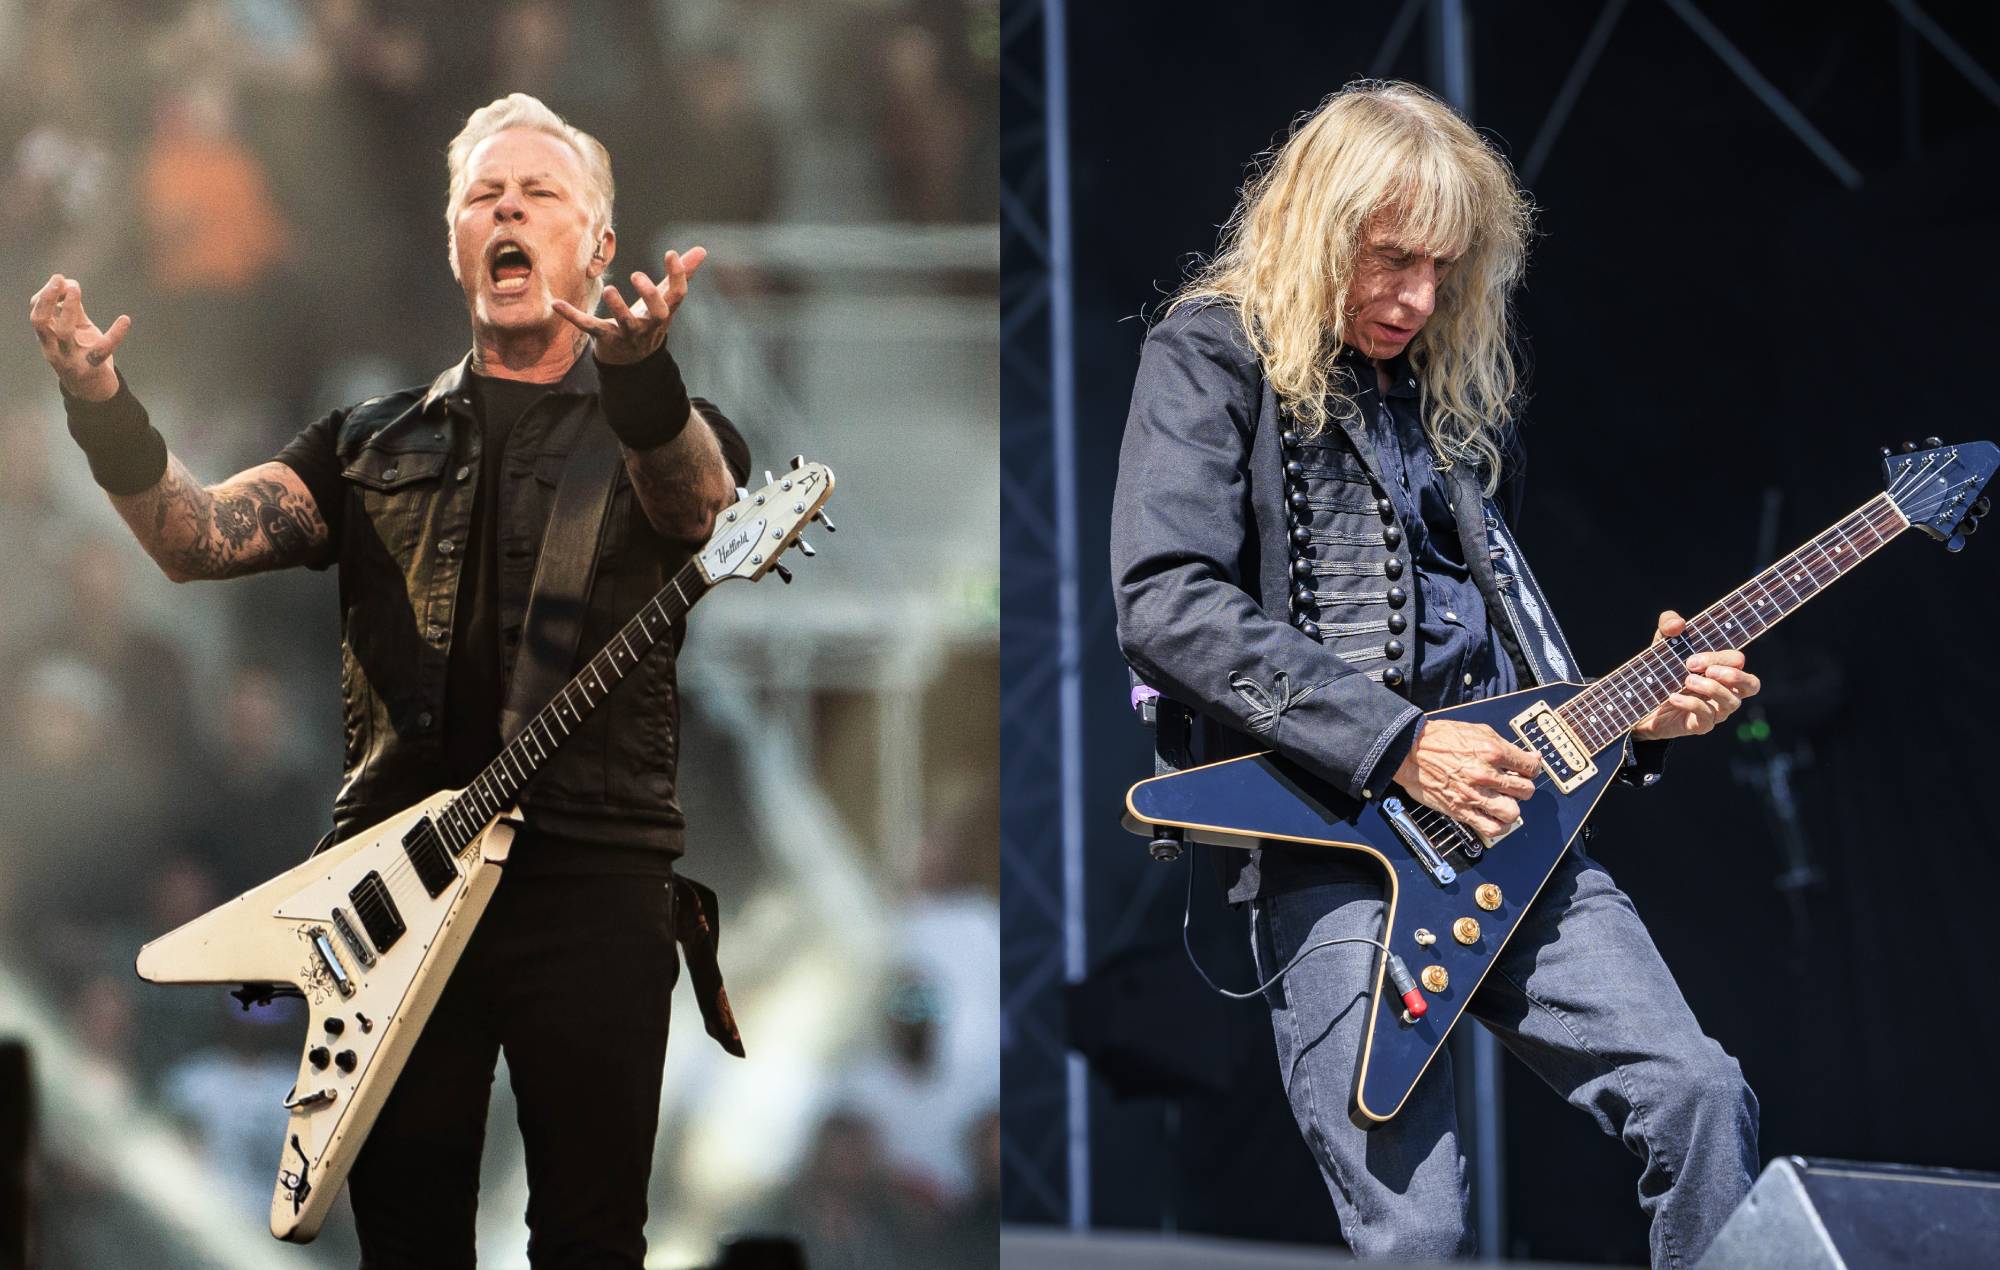 Watch Metallica team up with Diamond Head’s Brian Tatler to cover ‘Am I Evil?’ in Oslo